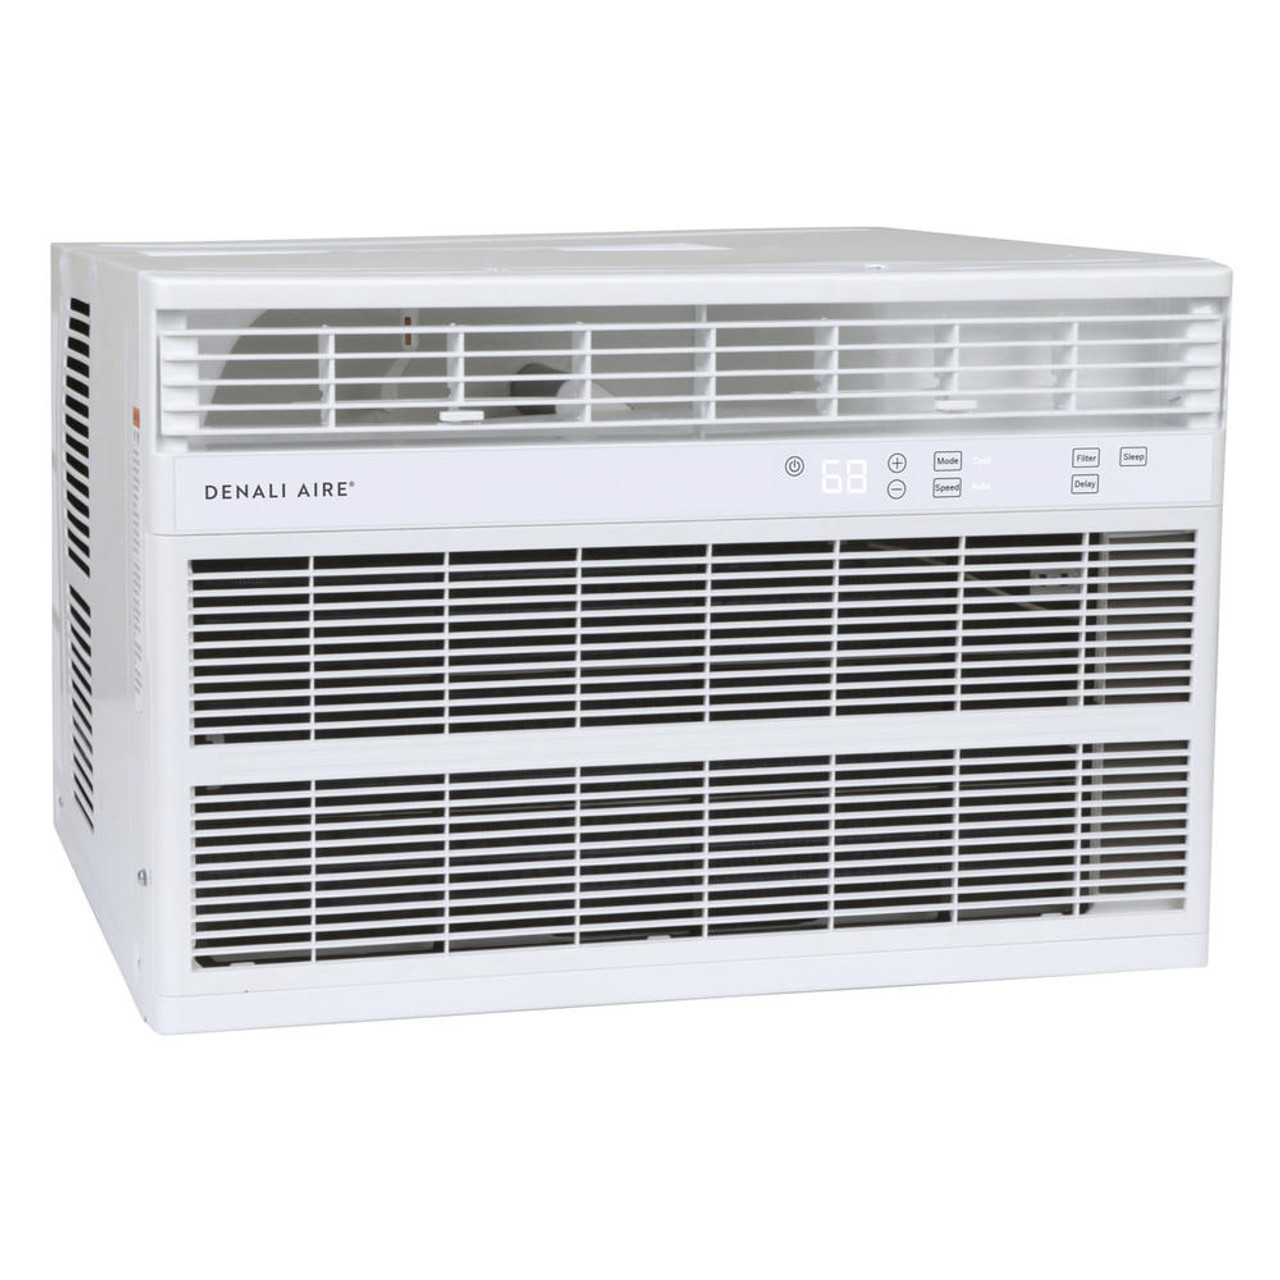 Denali Aire® 23,500 BTU Window Air Conditioner with Heat - Powerful Cooling - Chicken Pieces